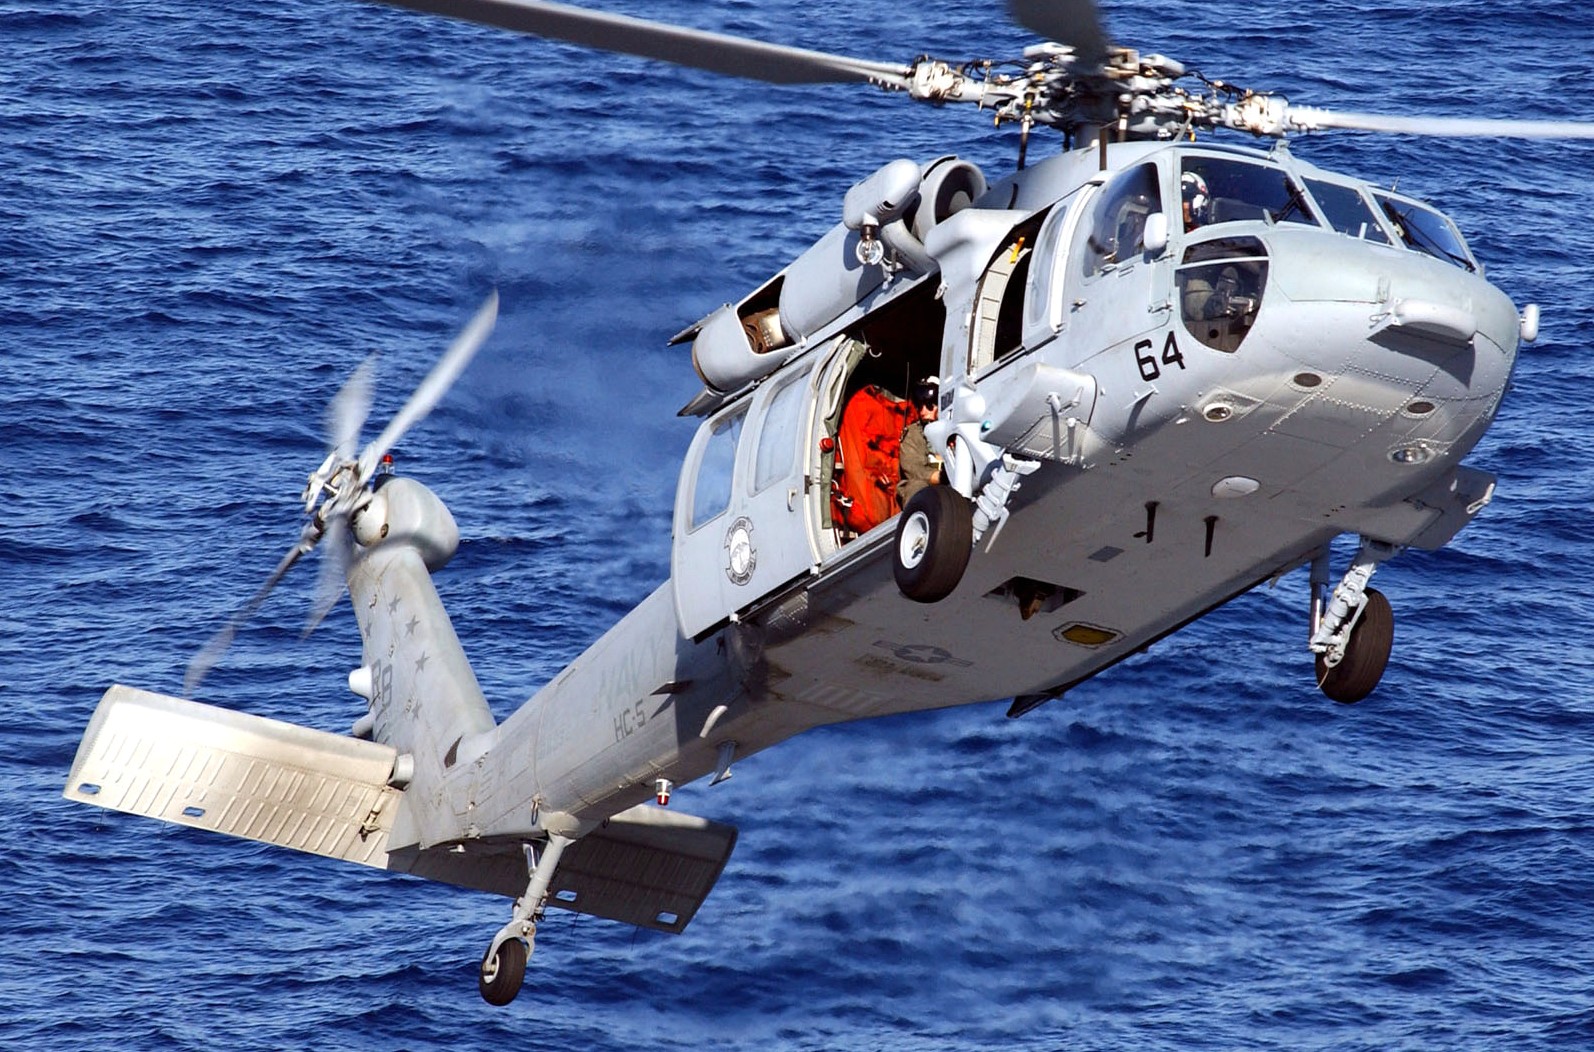 hc-5 providers helicopter combat support squadron navy mh-60s seahawk 29